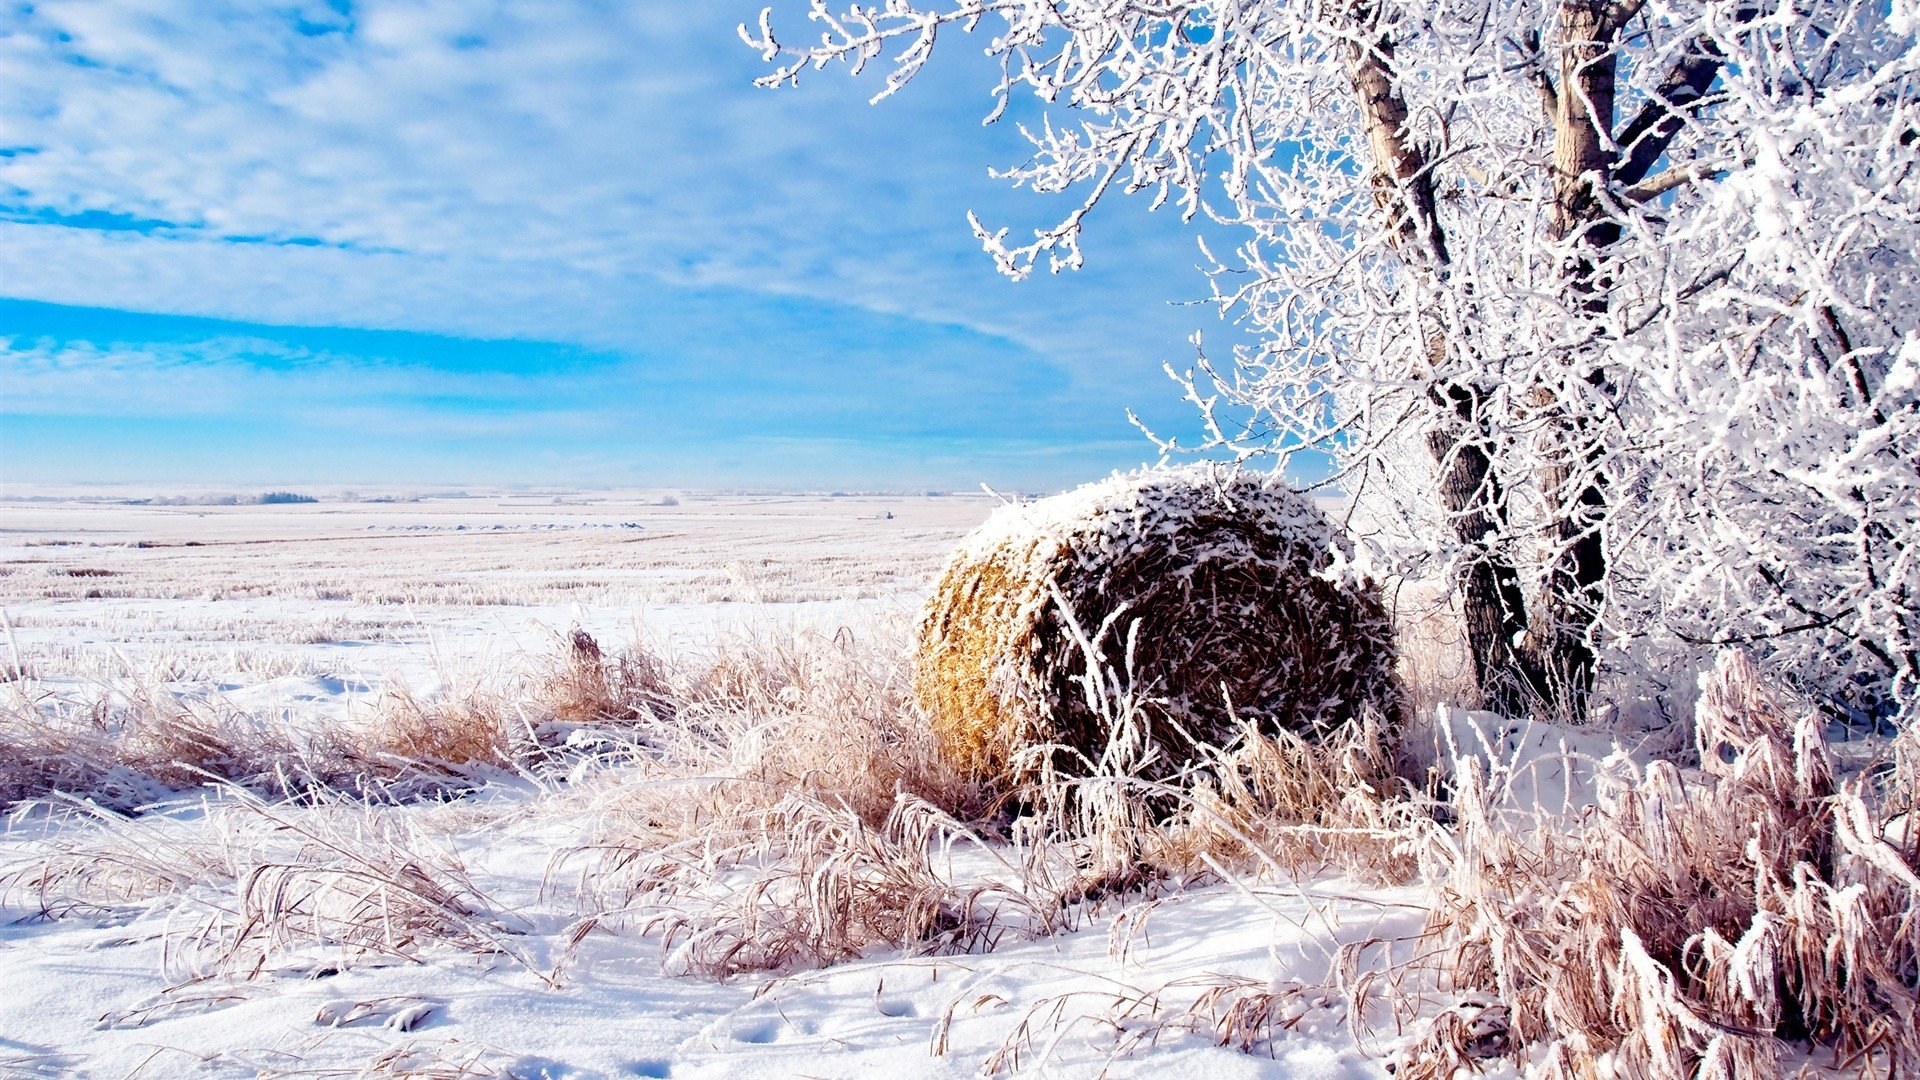 landscapes, Nature, Winter, Snow, Fields, Wheat, Natural, Scenery Wallpaper